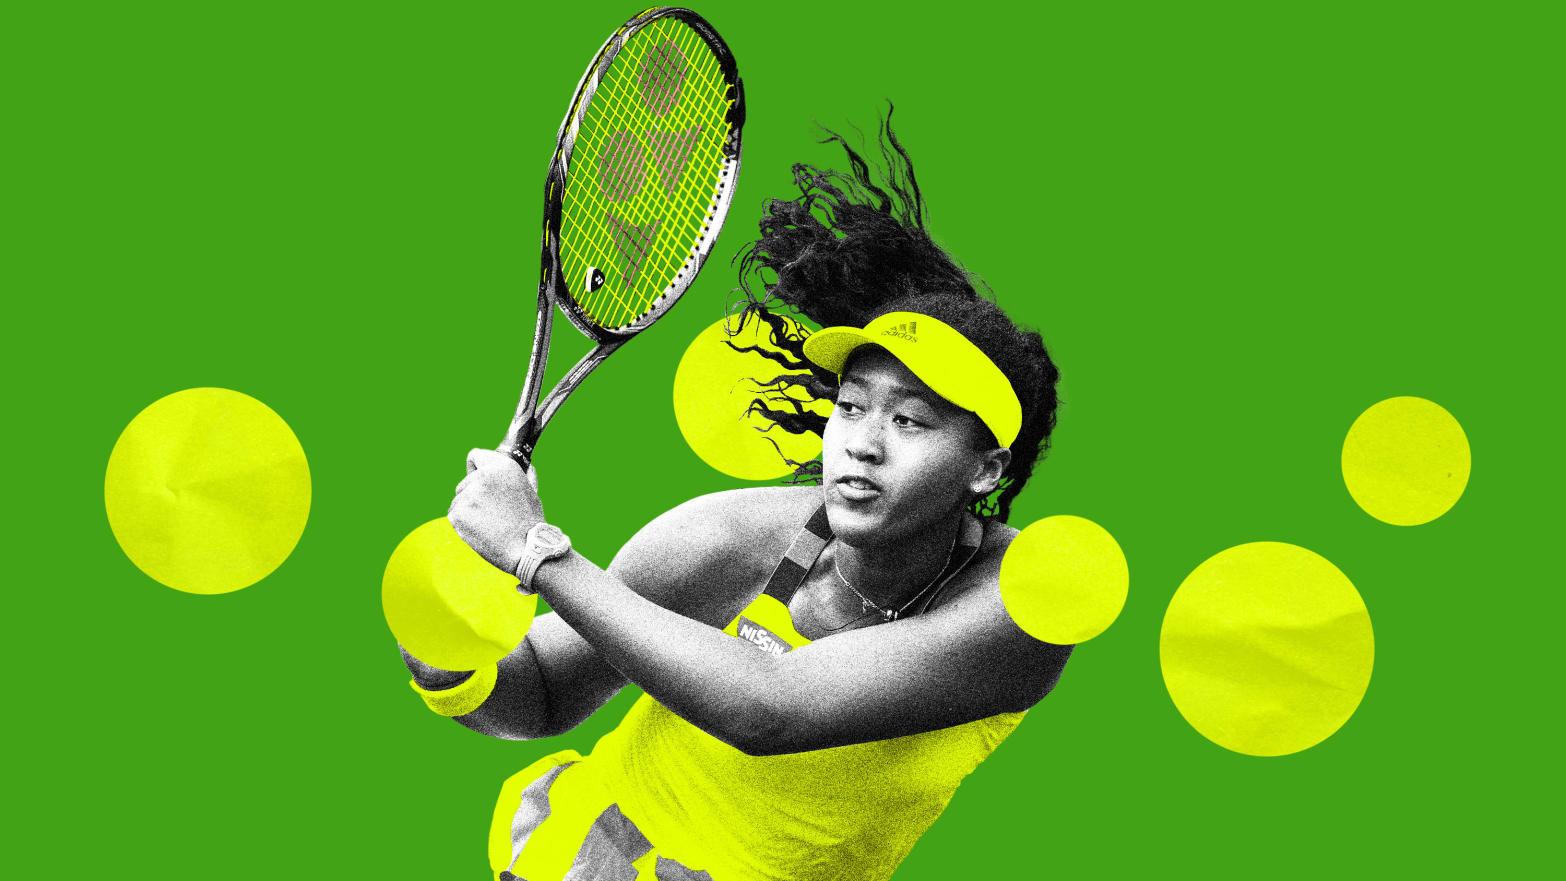 Photo illustration of tennis player, Naomi Osaka, on a green background with bright yellow balls